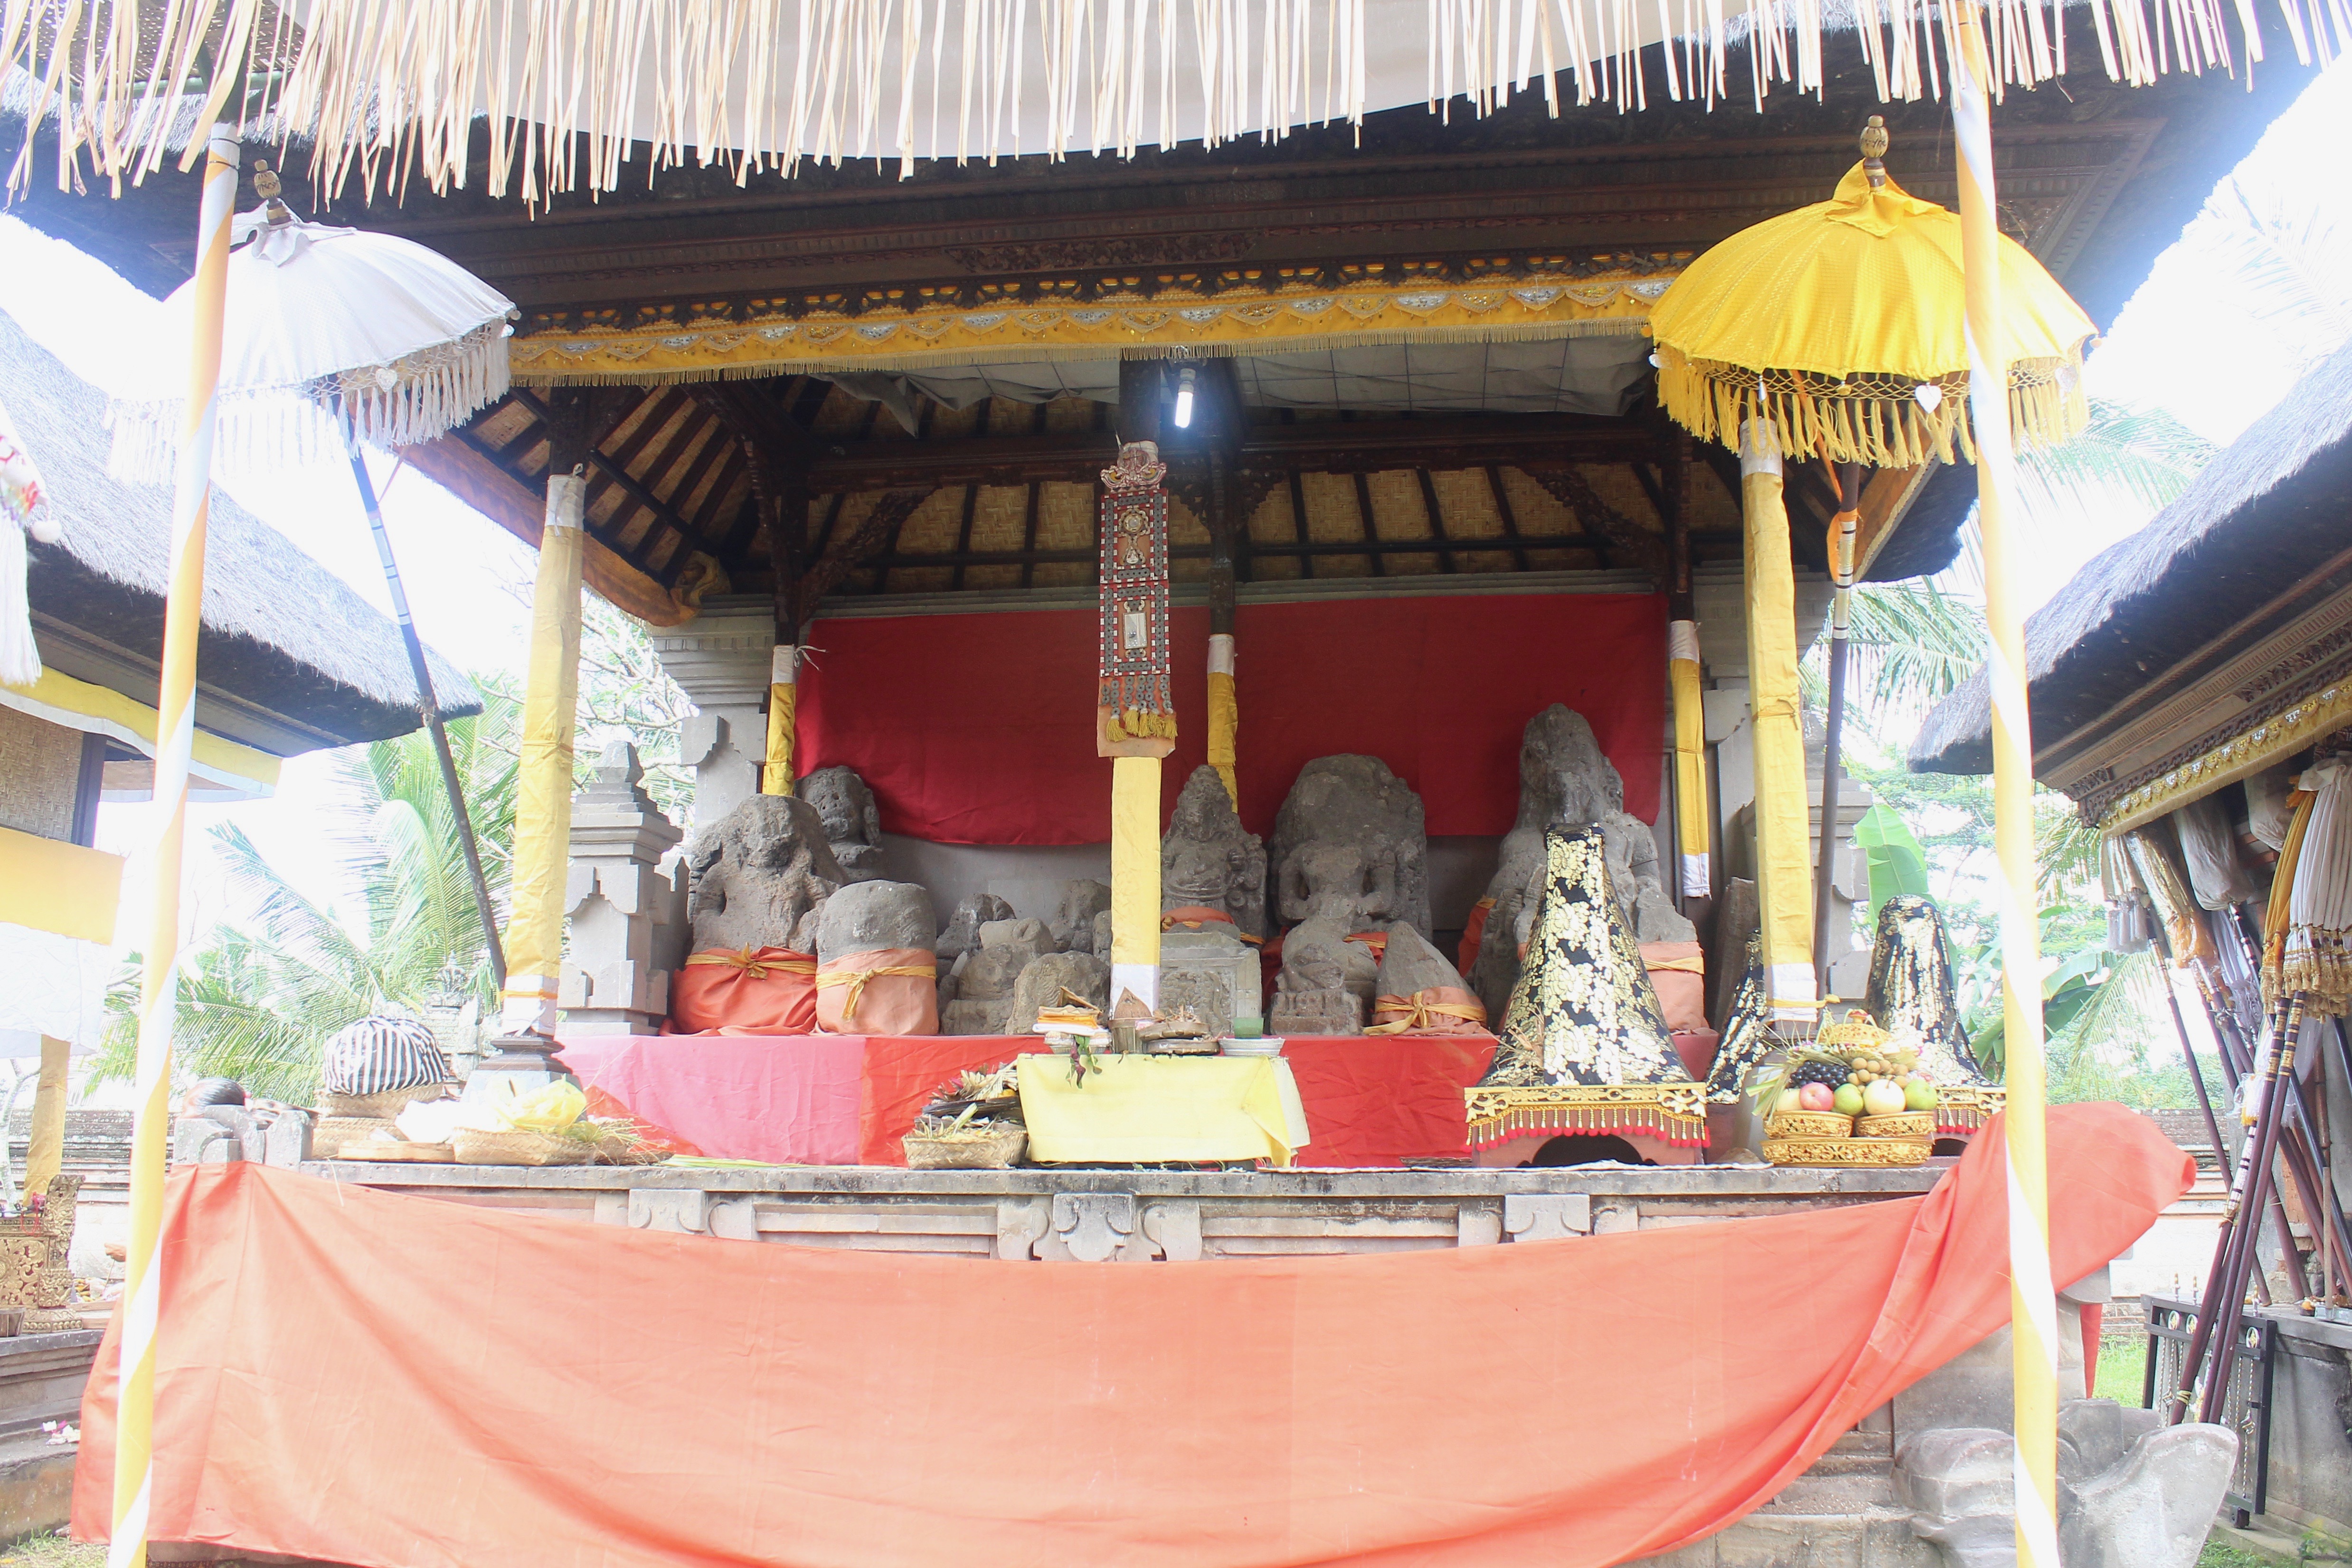 Old sculptures in a newer shrine